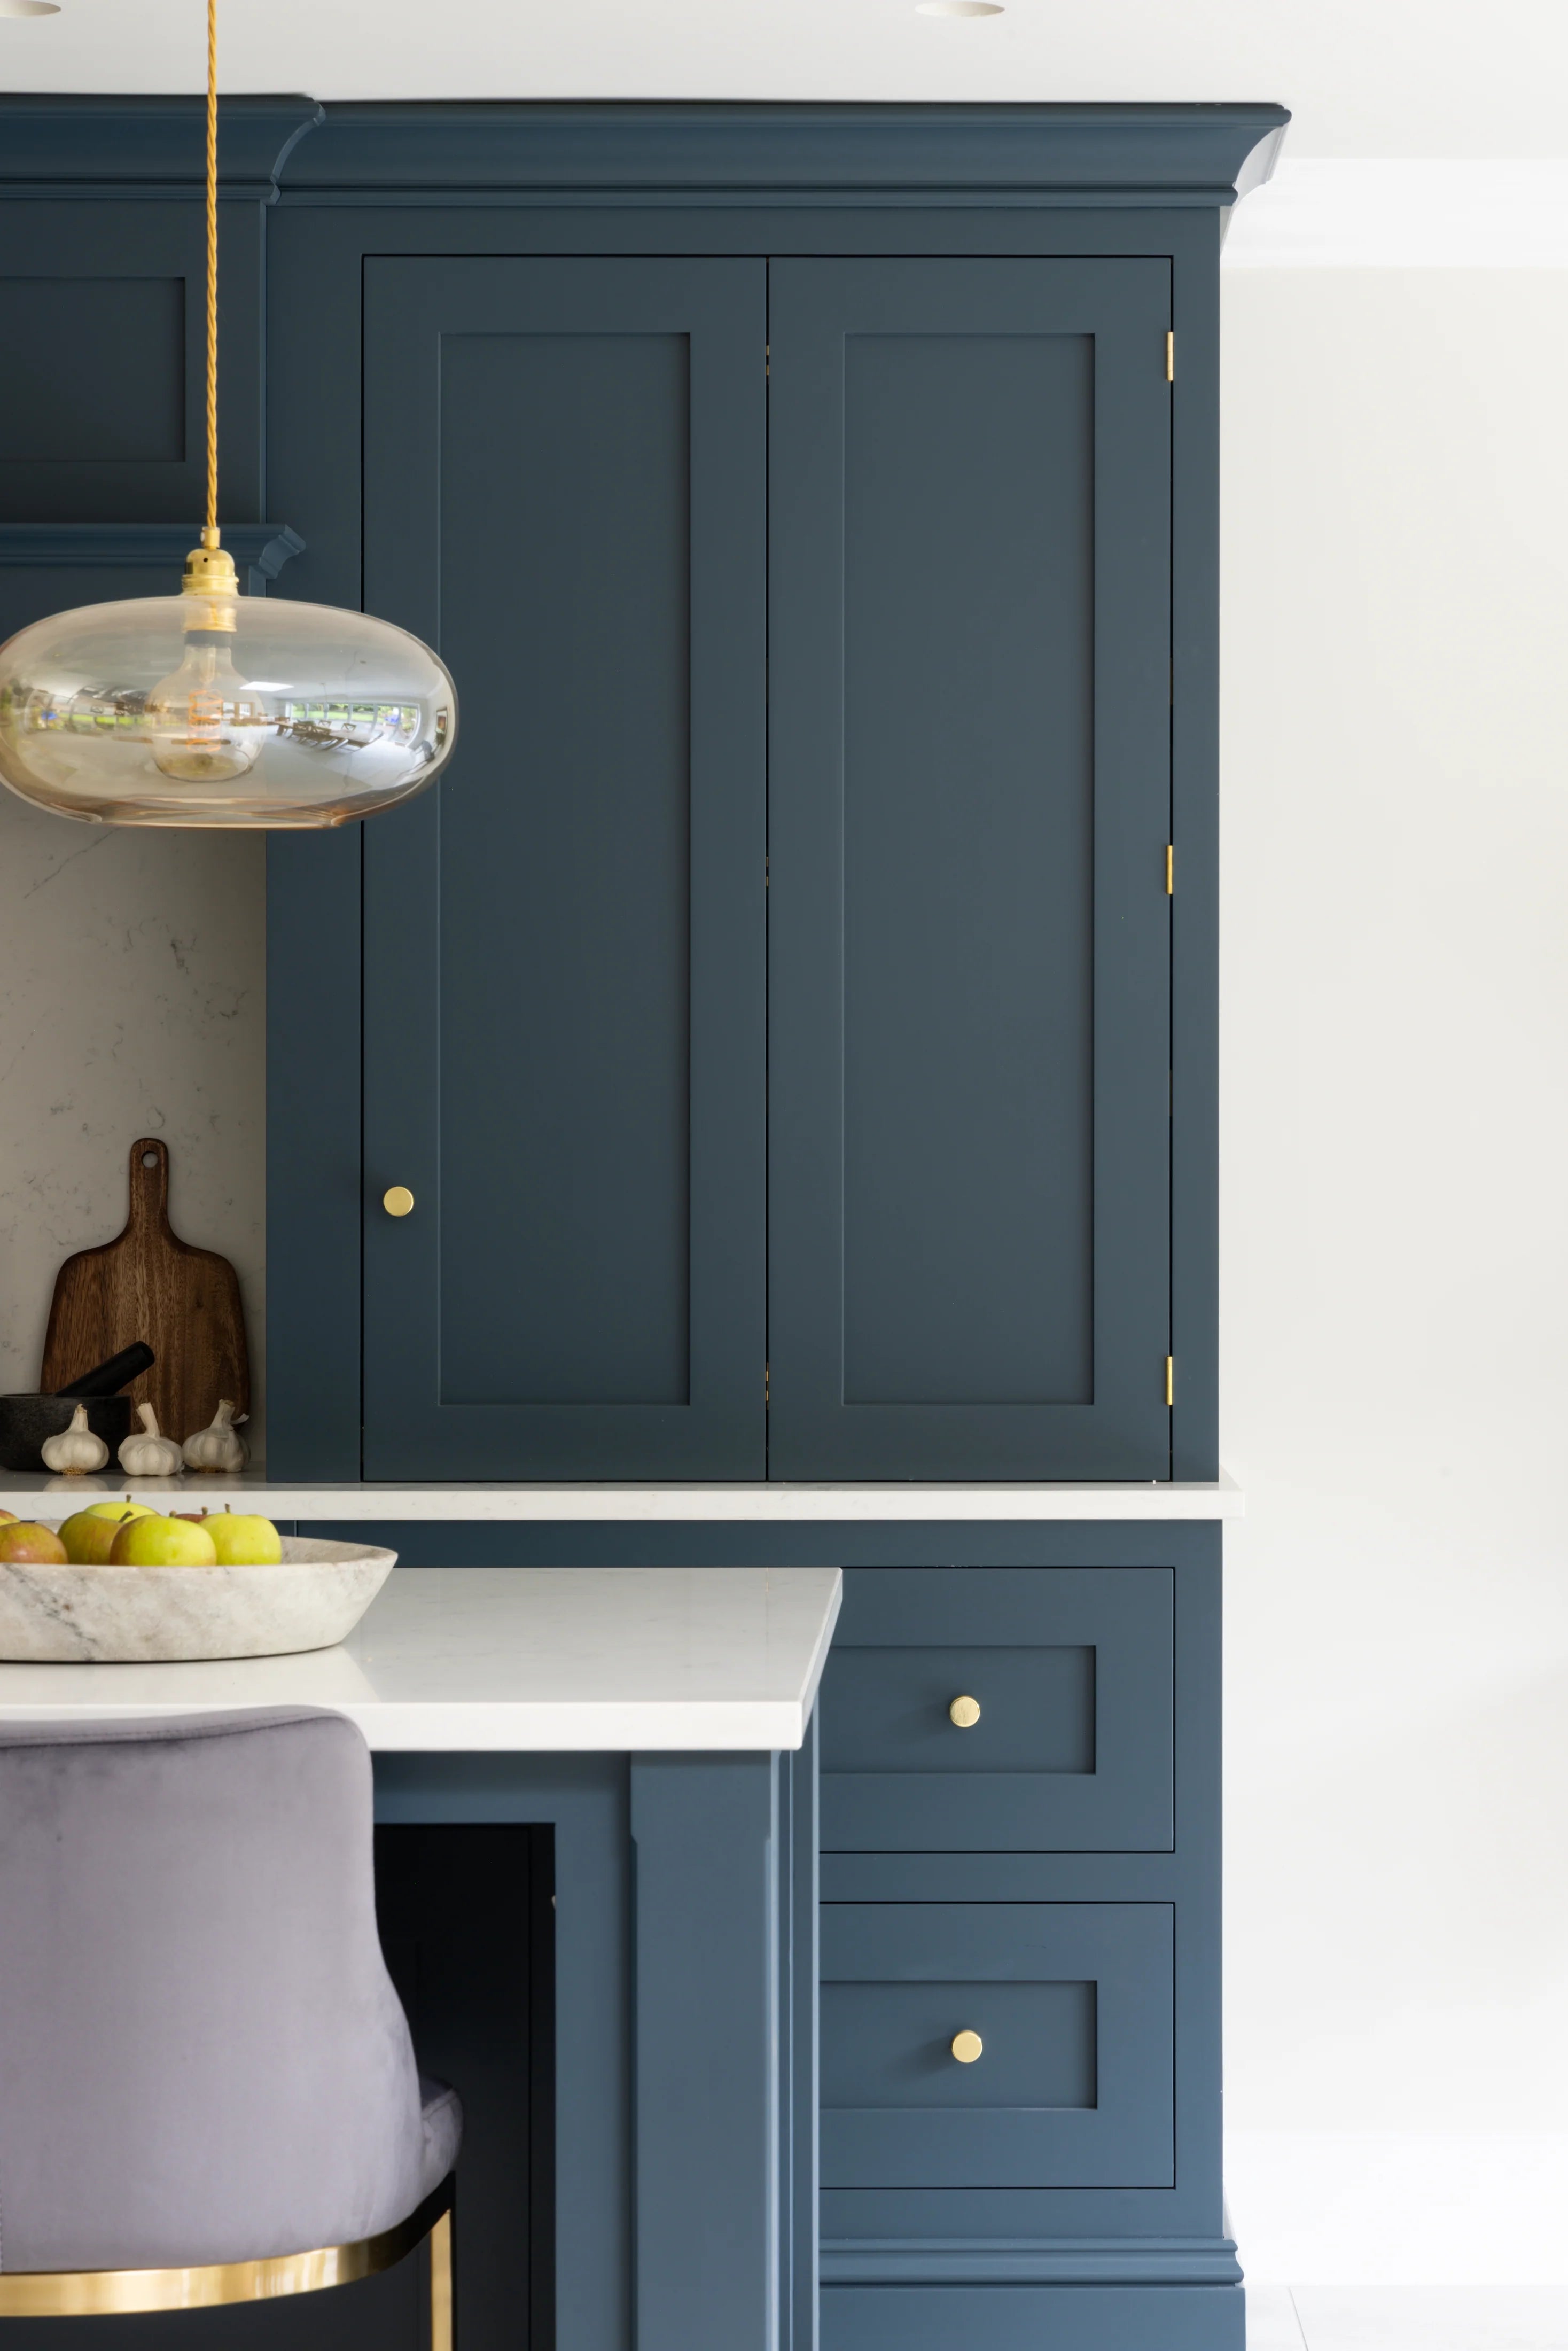 The Blue and Gold Kitchen